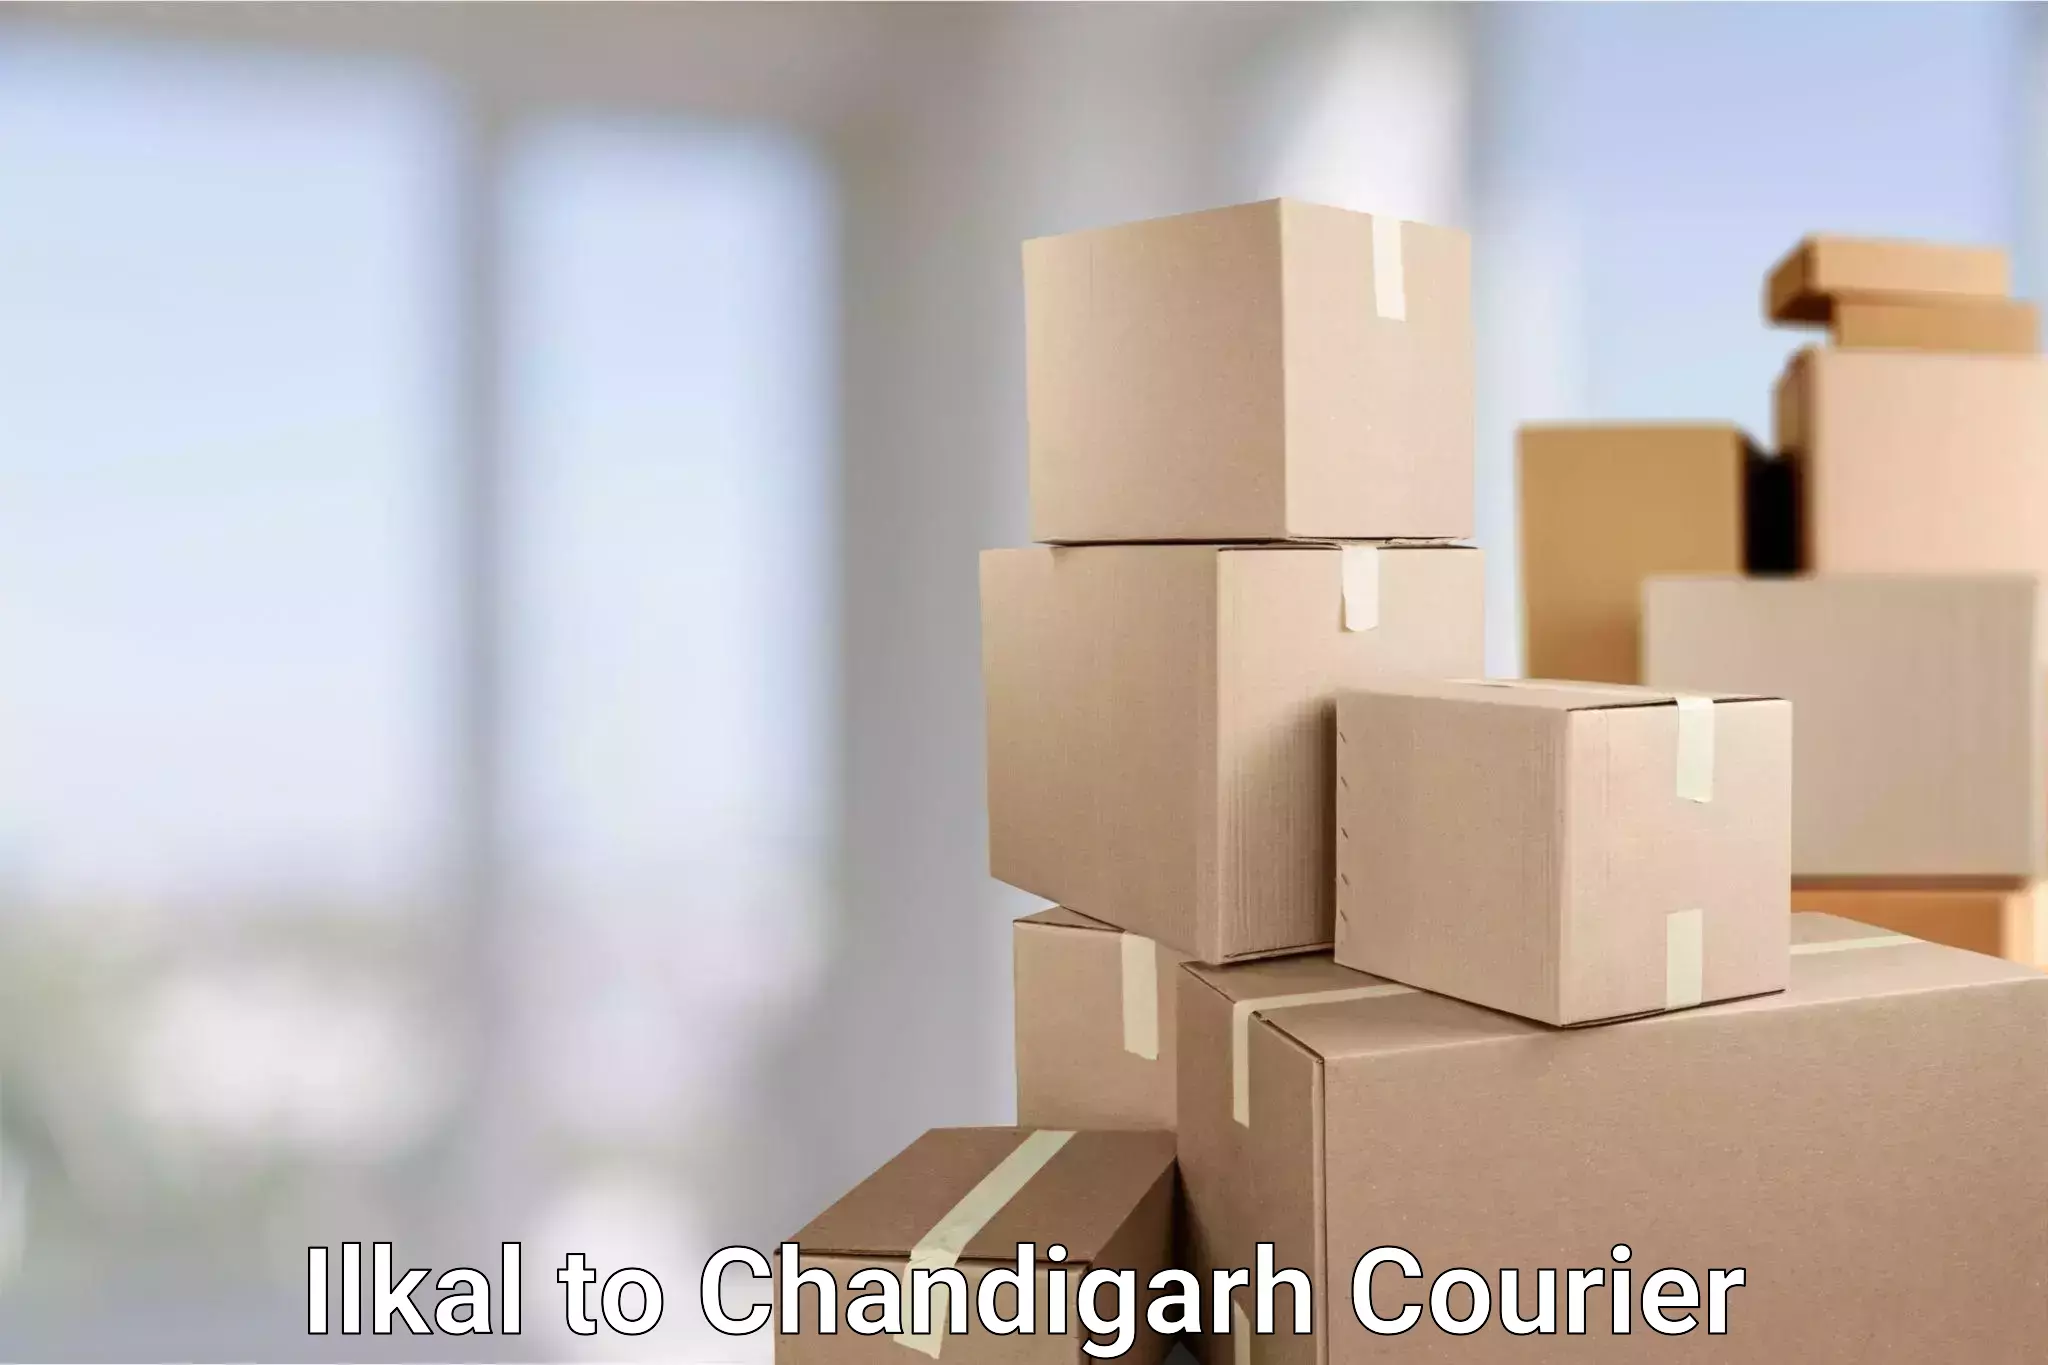 On-call courier service Ilkal to Panjab University Chandigarh